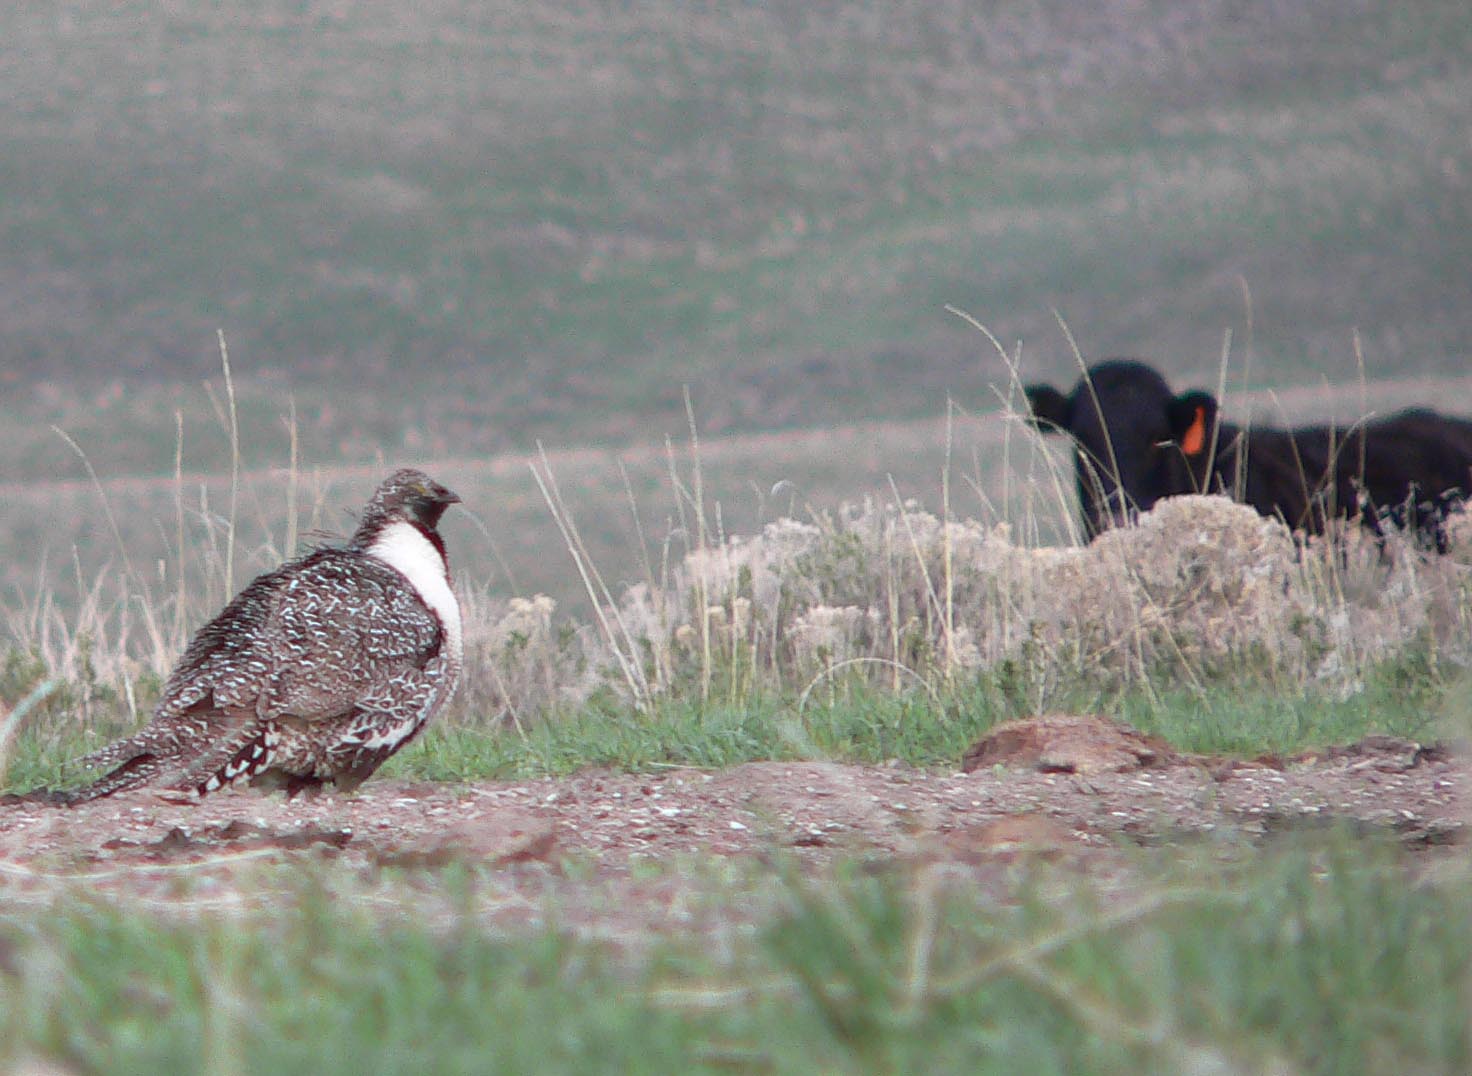 Cow looking at sage-grouse hen